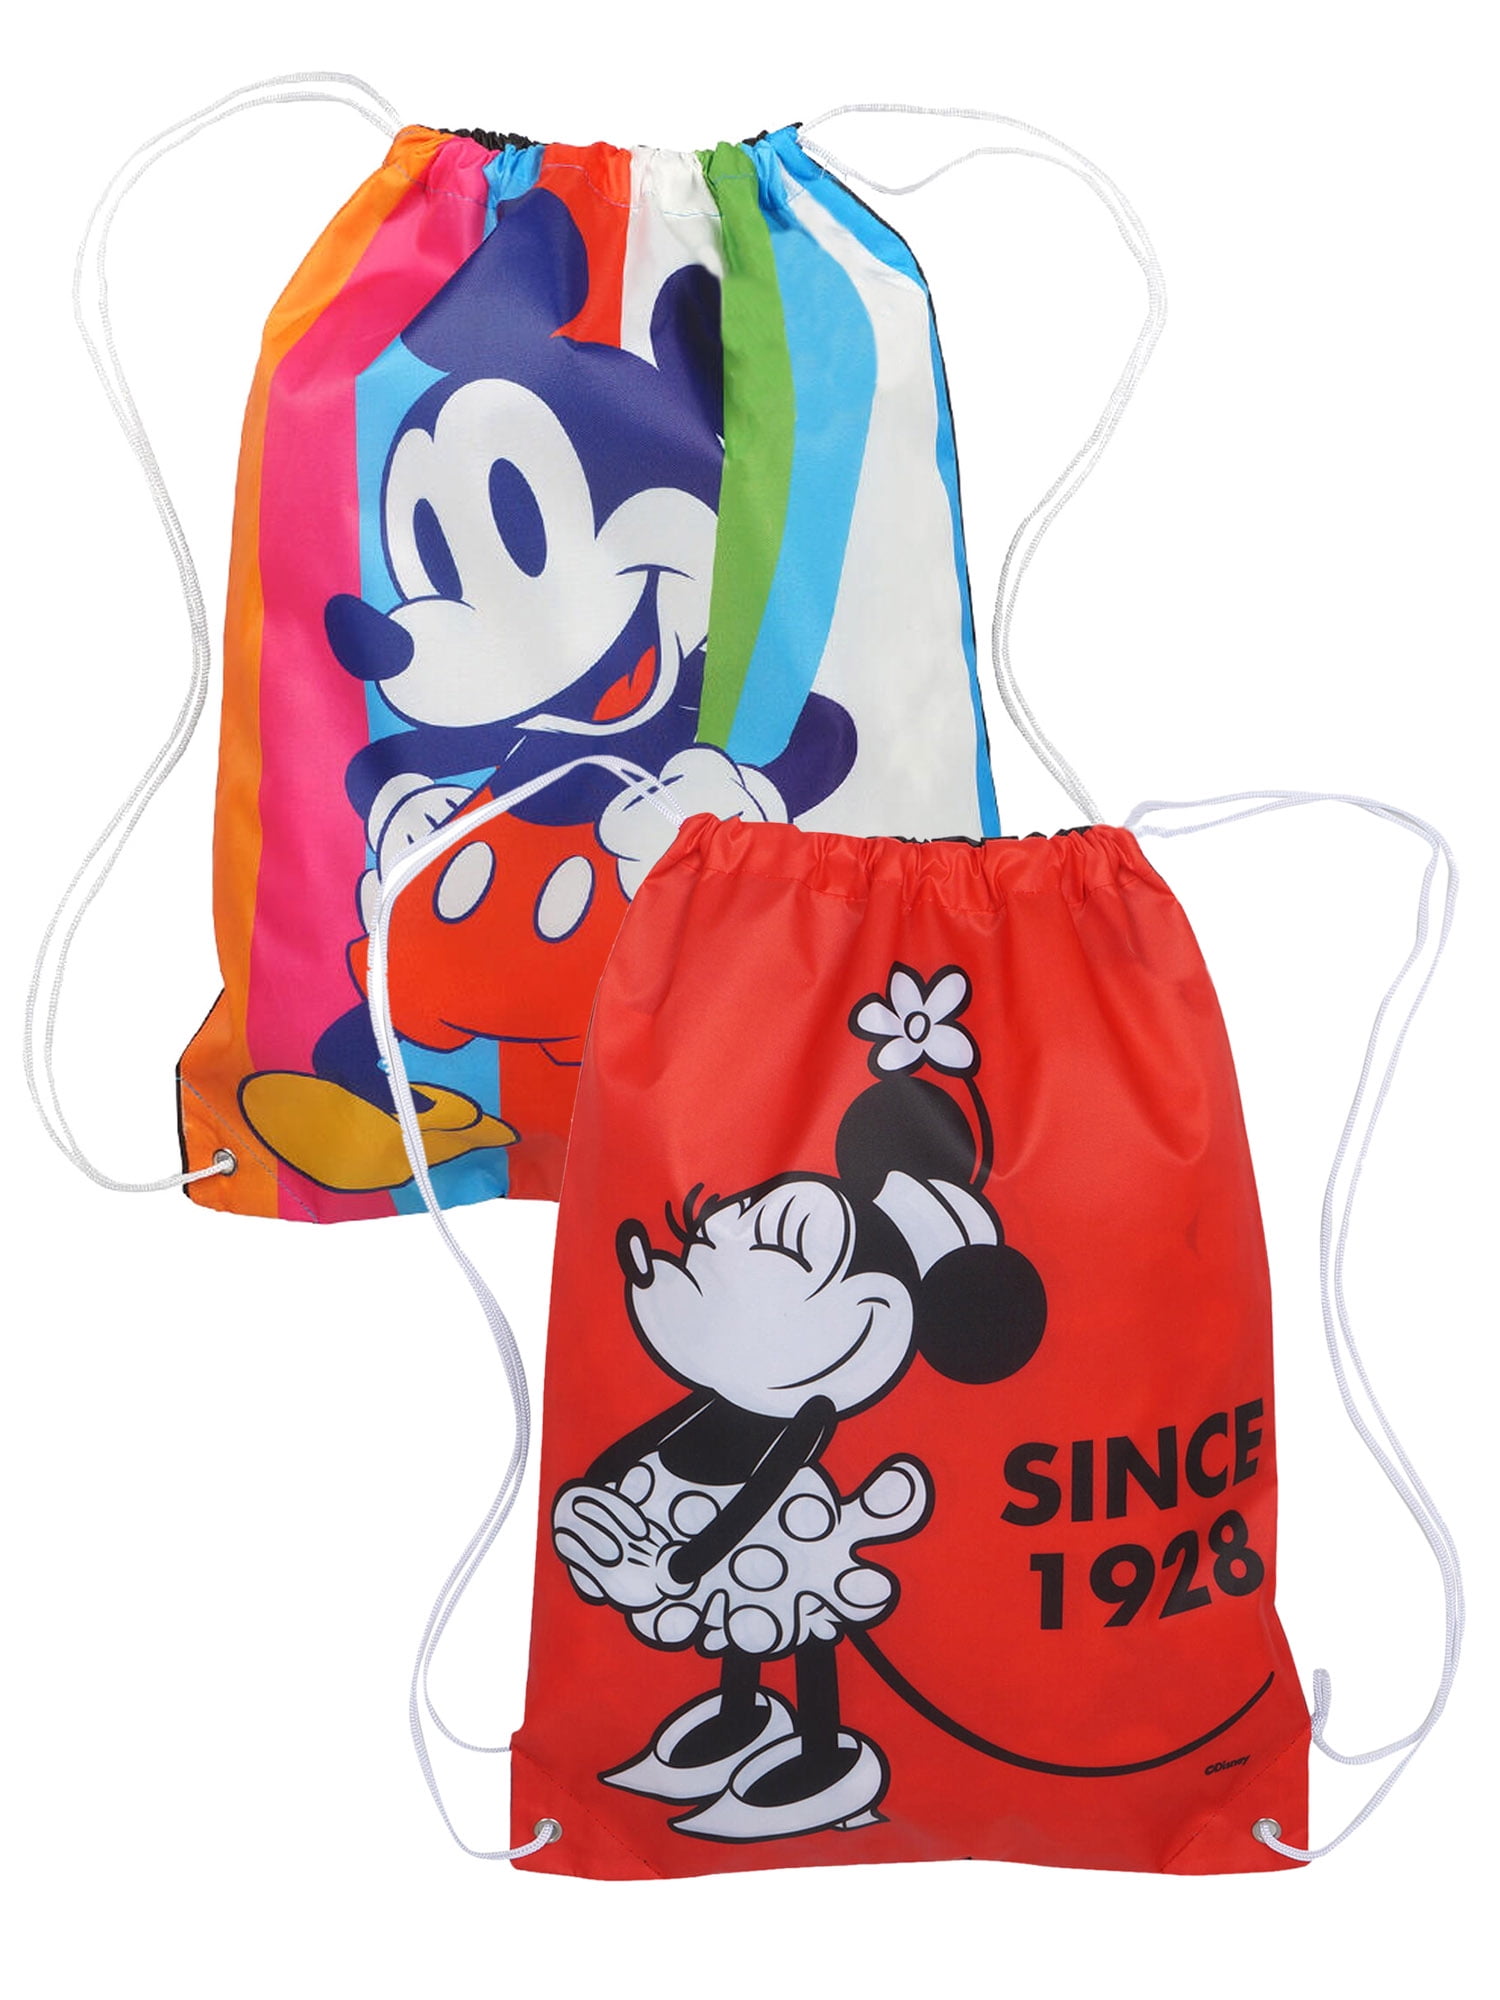 PVC Red Heart Shaped Translucent Bag MINNIE MOUSE DISNEY